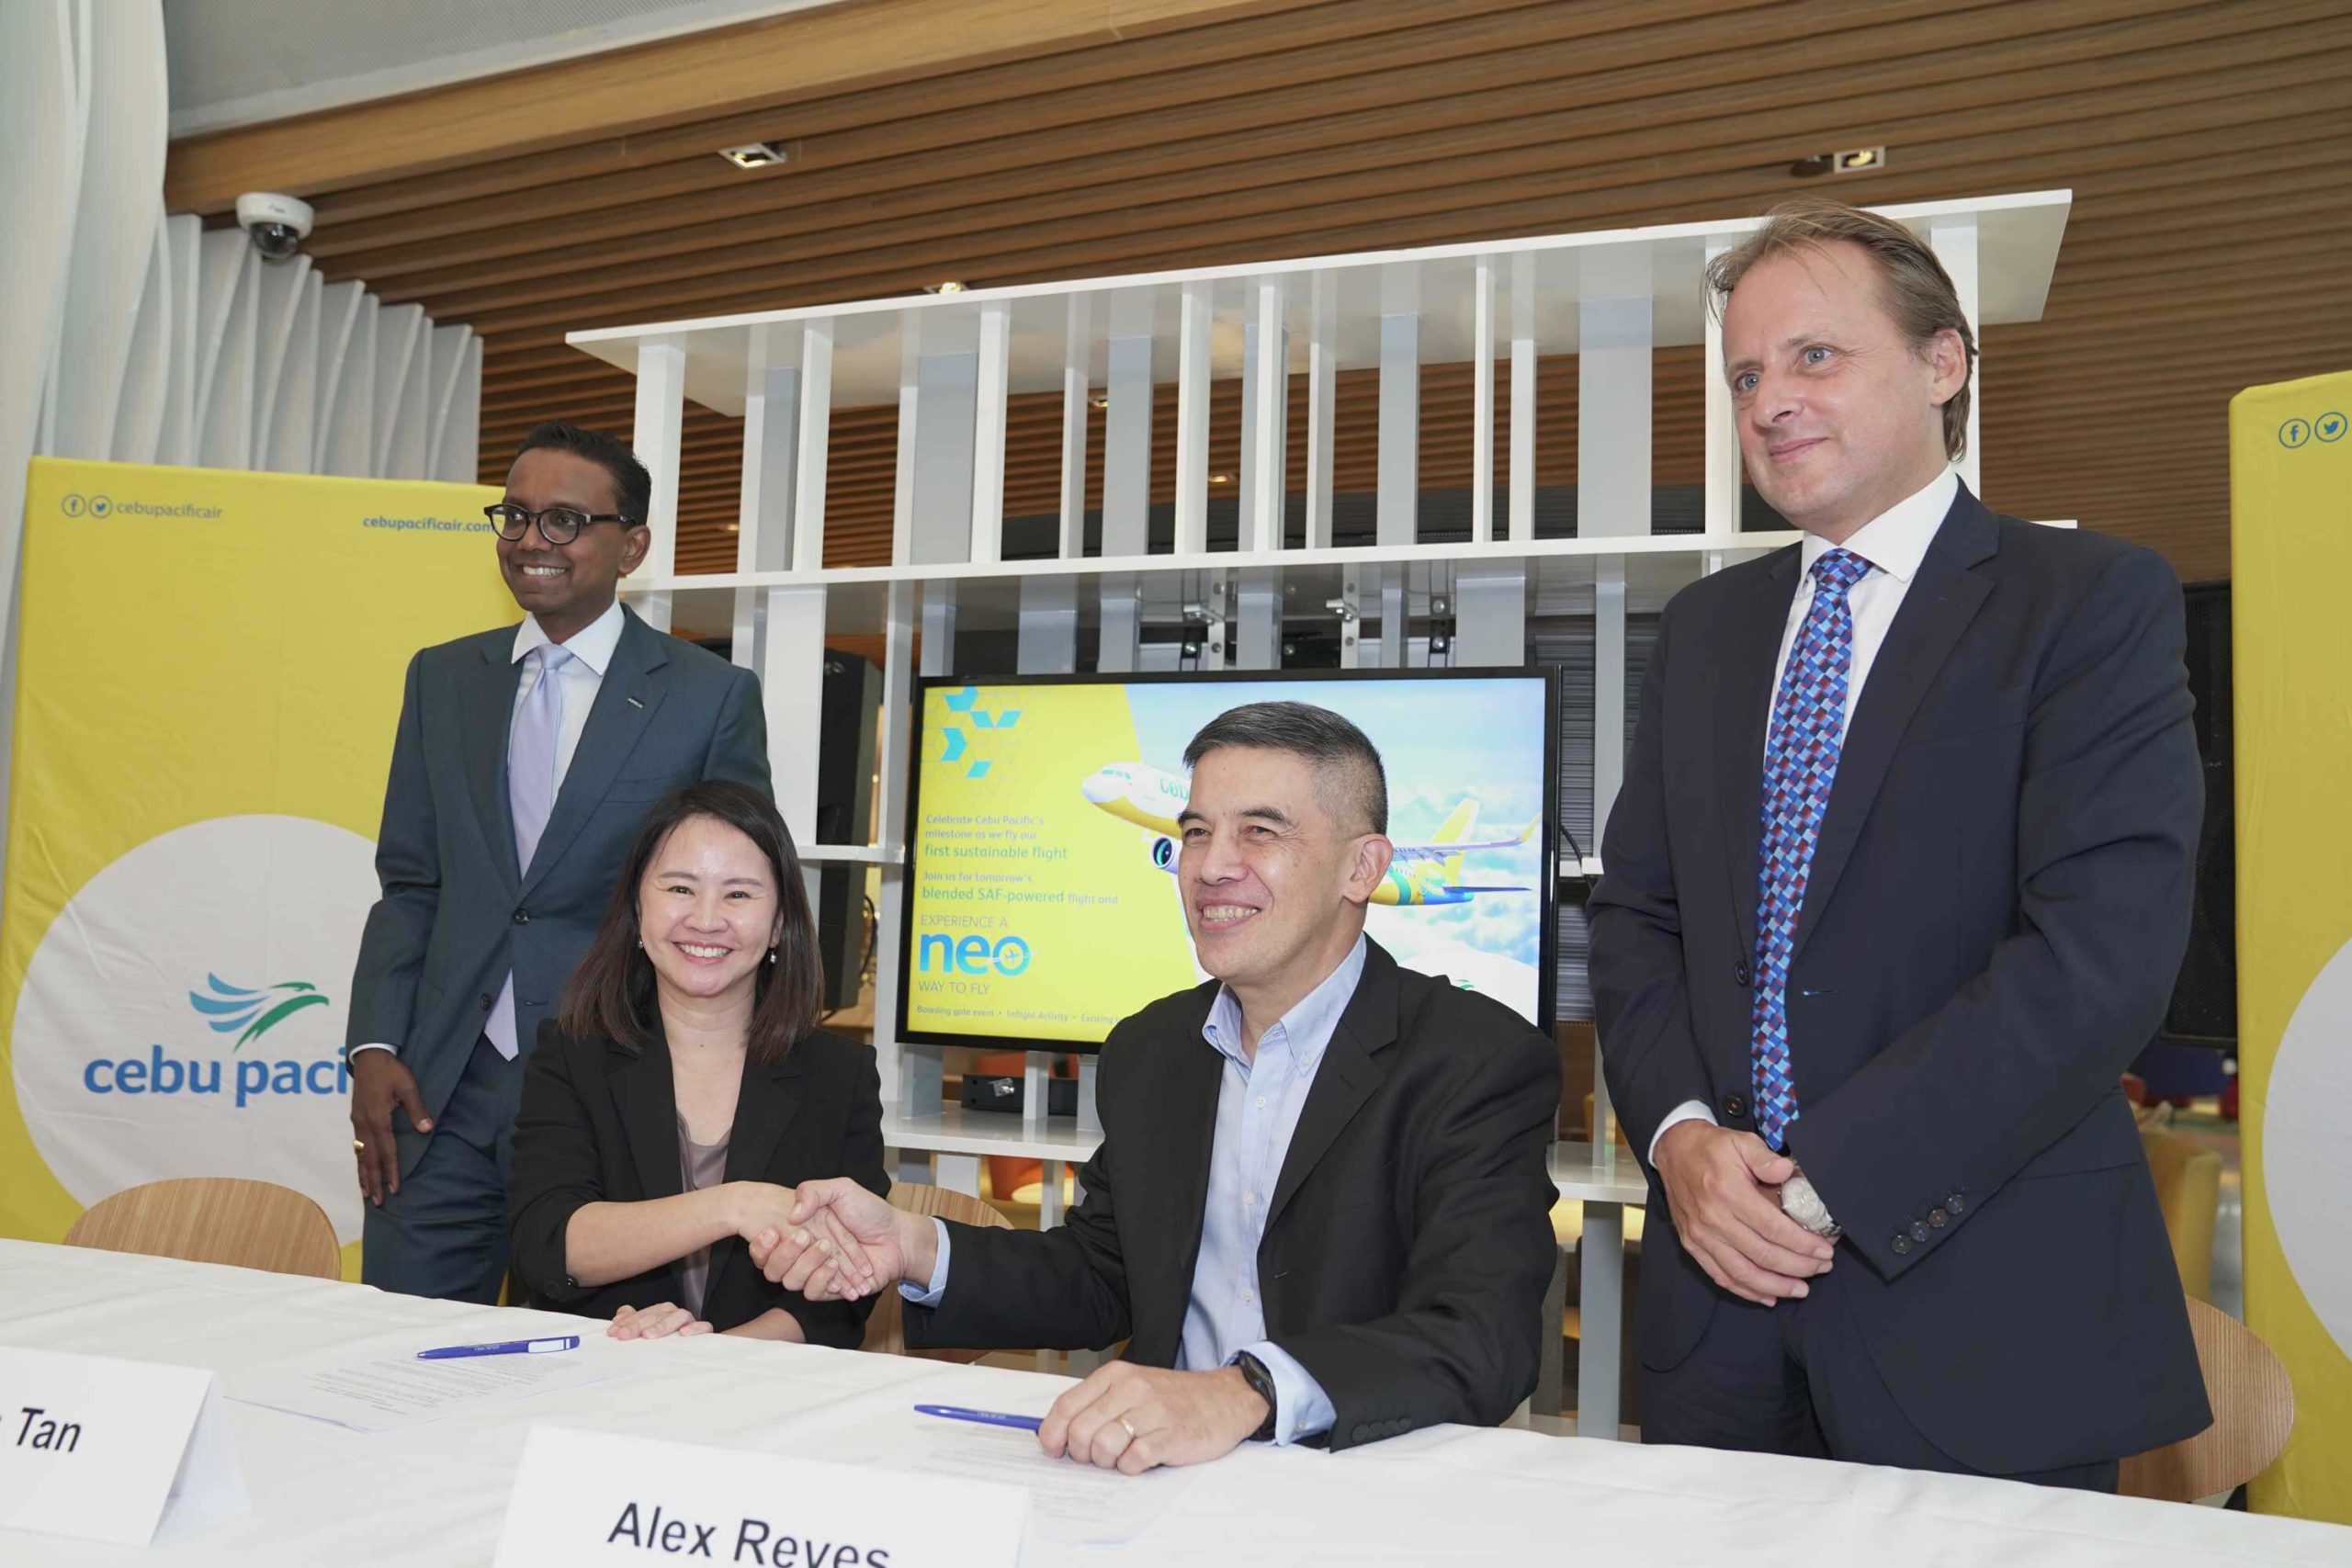 SUSTAINABLE AVIATION FUEL. (From left) Anand Stanley, President Airbus Asia-Pacific; Doris Tan, Head of Shell Aviation Asia Pacific & Middle East; Alex Reyes, Chief Strategy Officer, CEB; Javier Massot, Chief Operations Officer,CEB, at the MOU Signing Between CebuPacific and Shell.